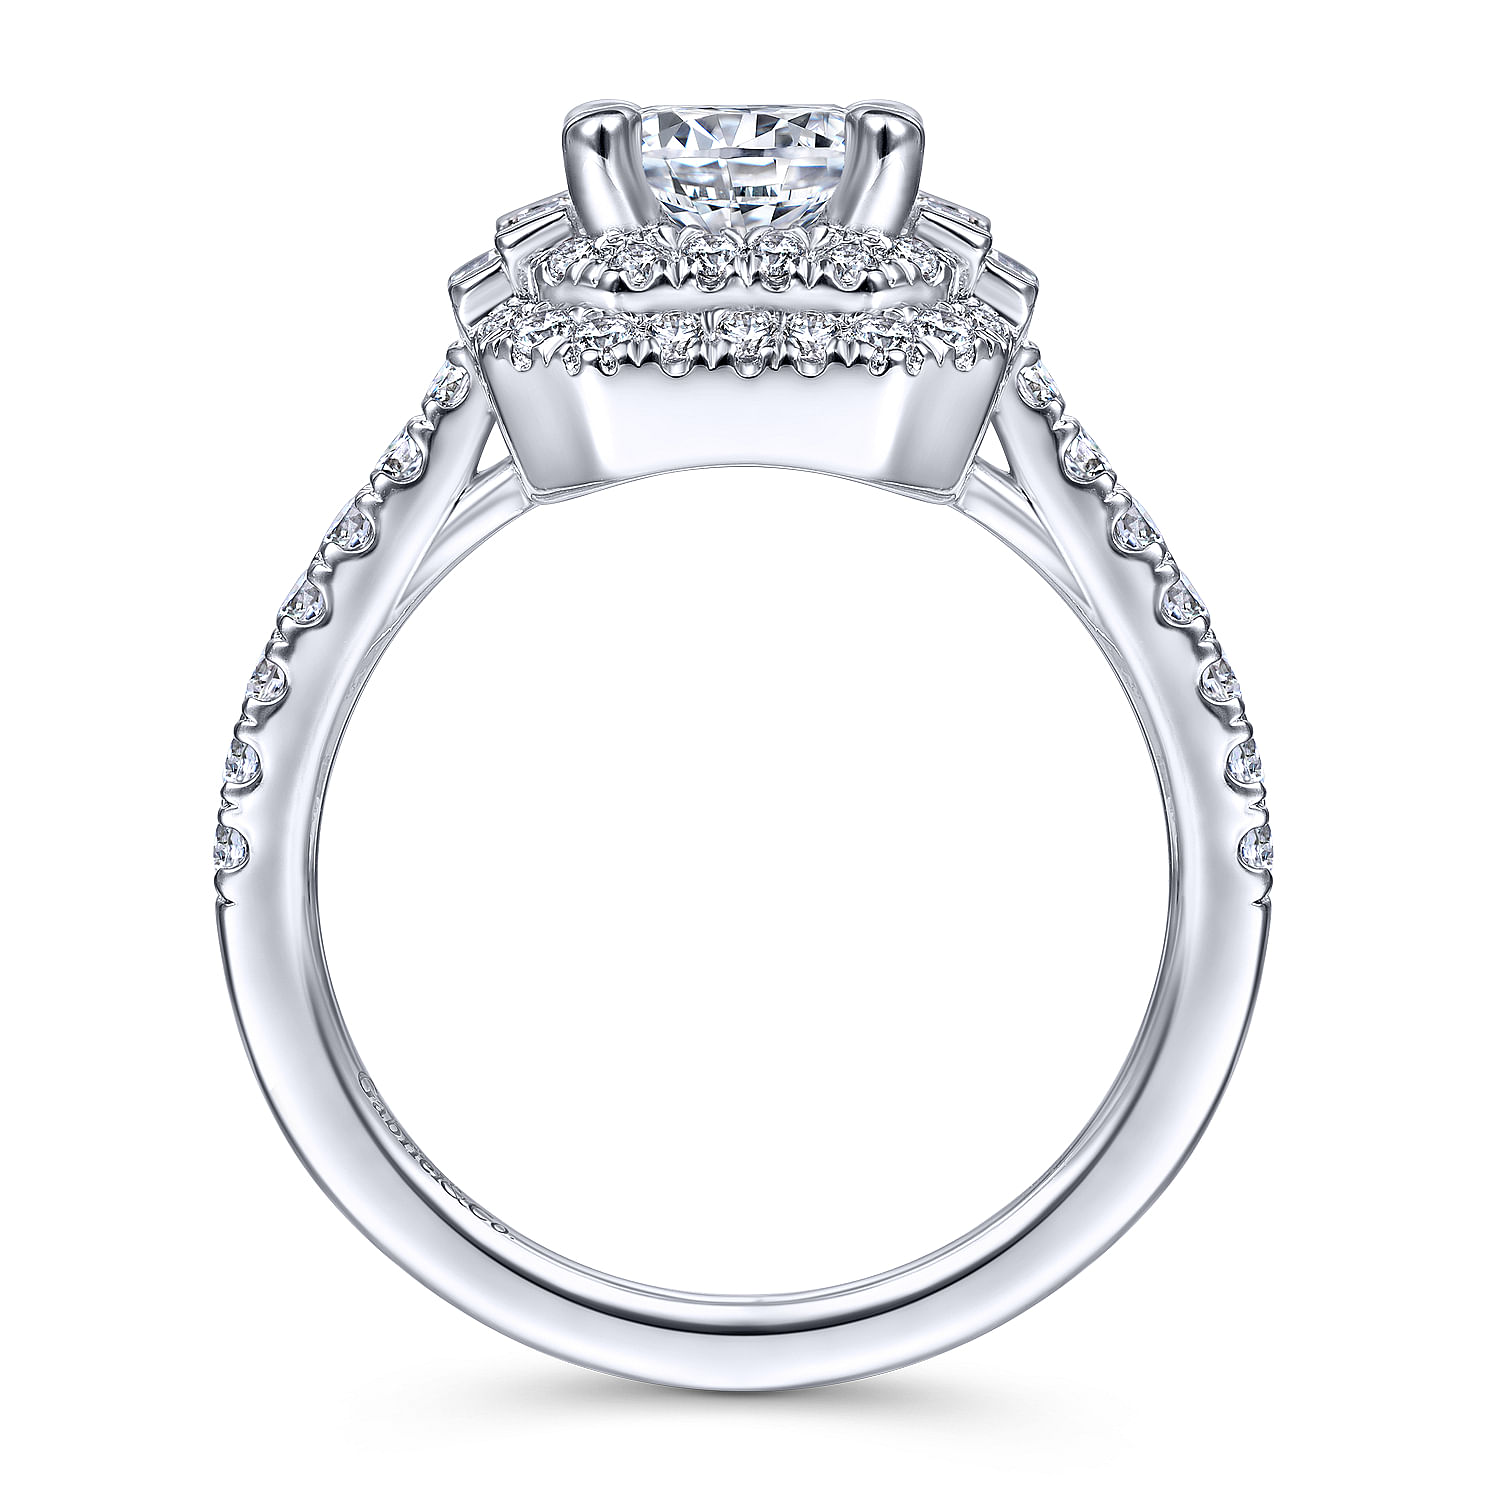 Vintage Inspired 14k White Gold Cushion Double Halo Round Diamond Channel Set Engagement Ring